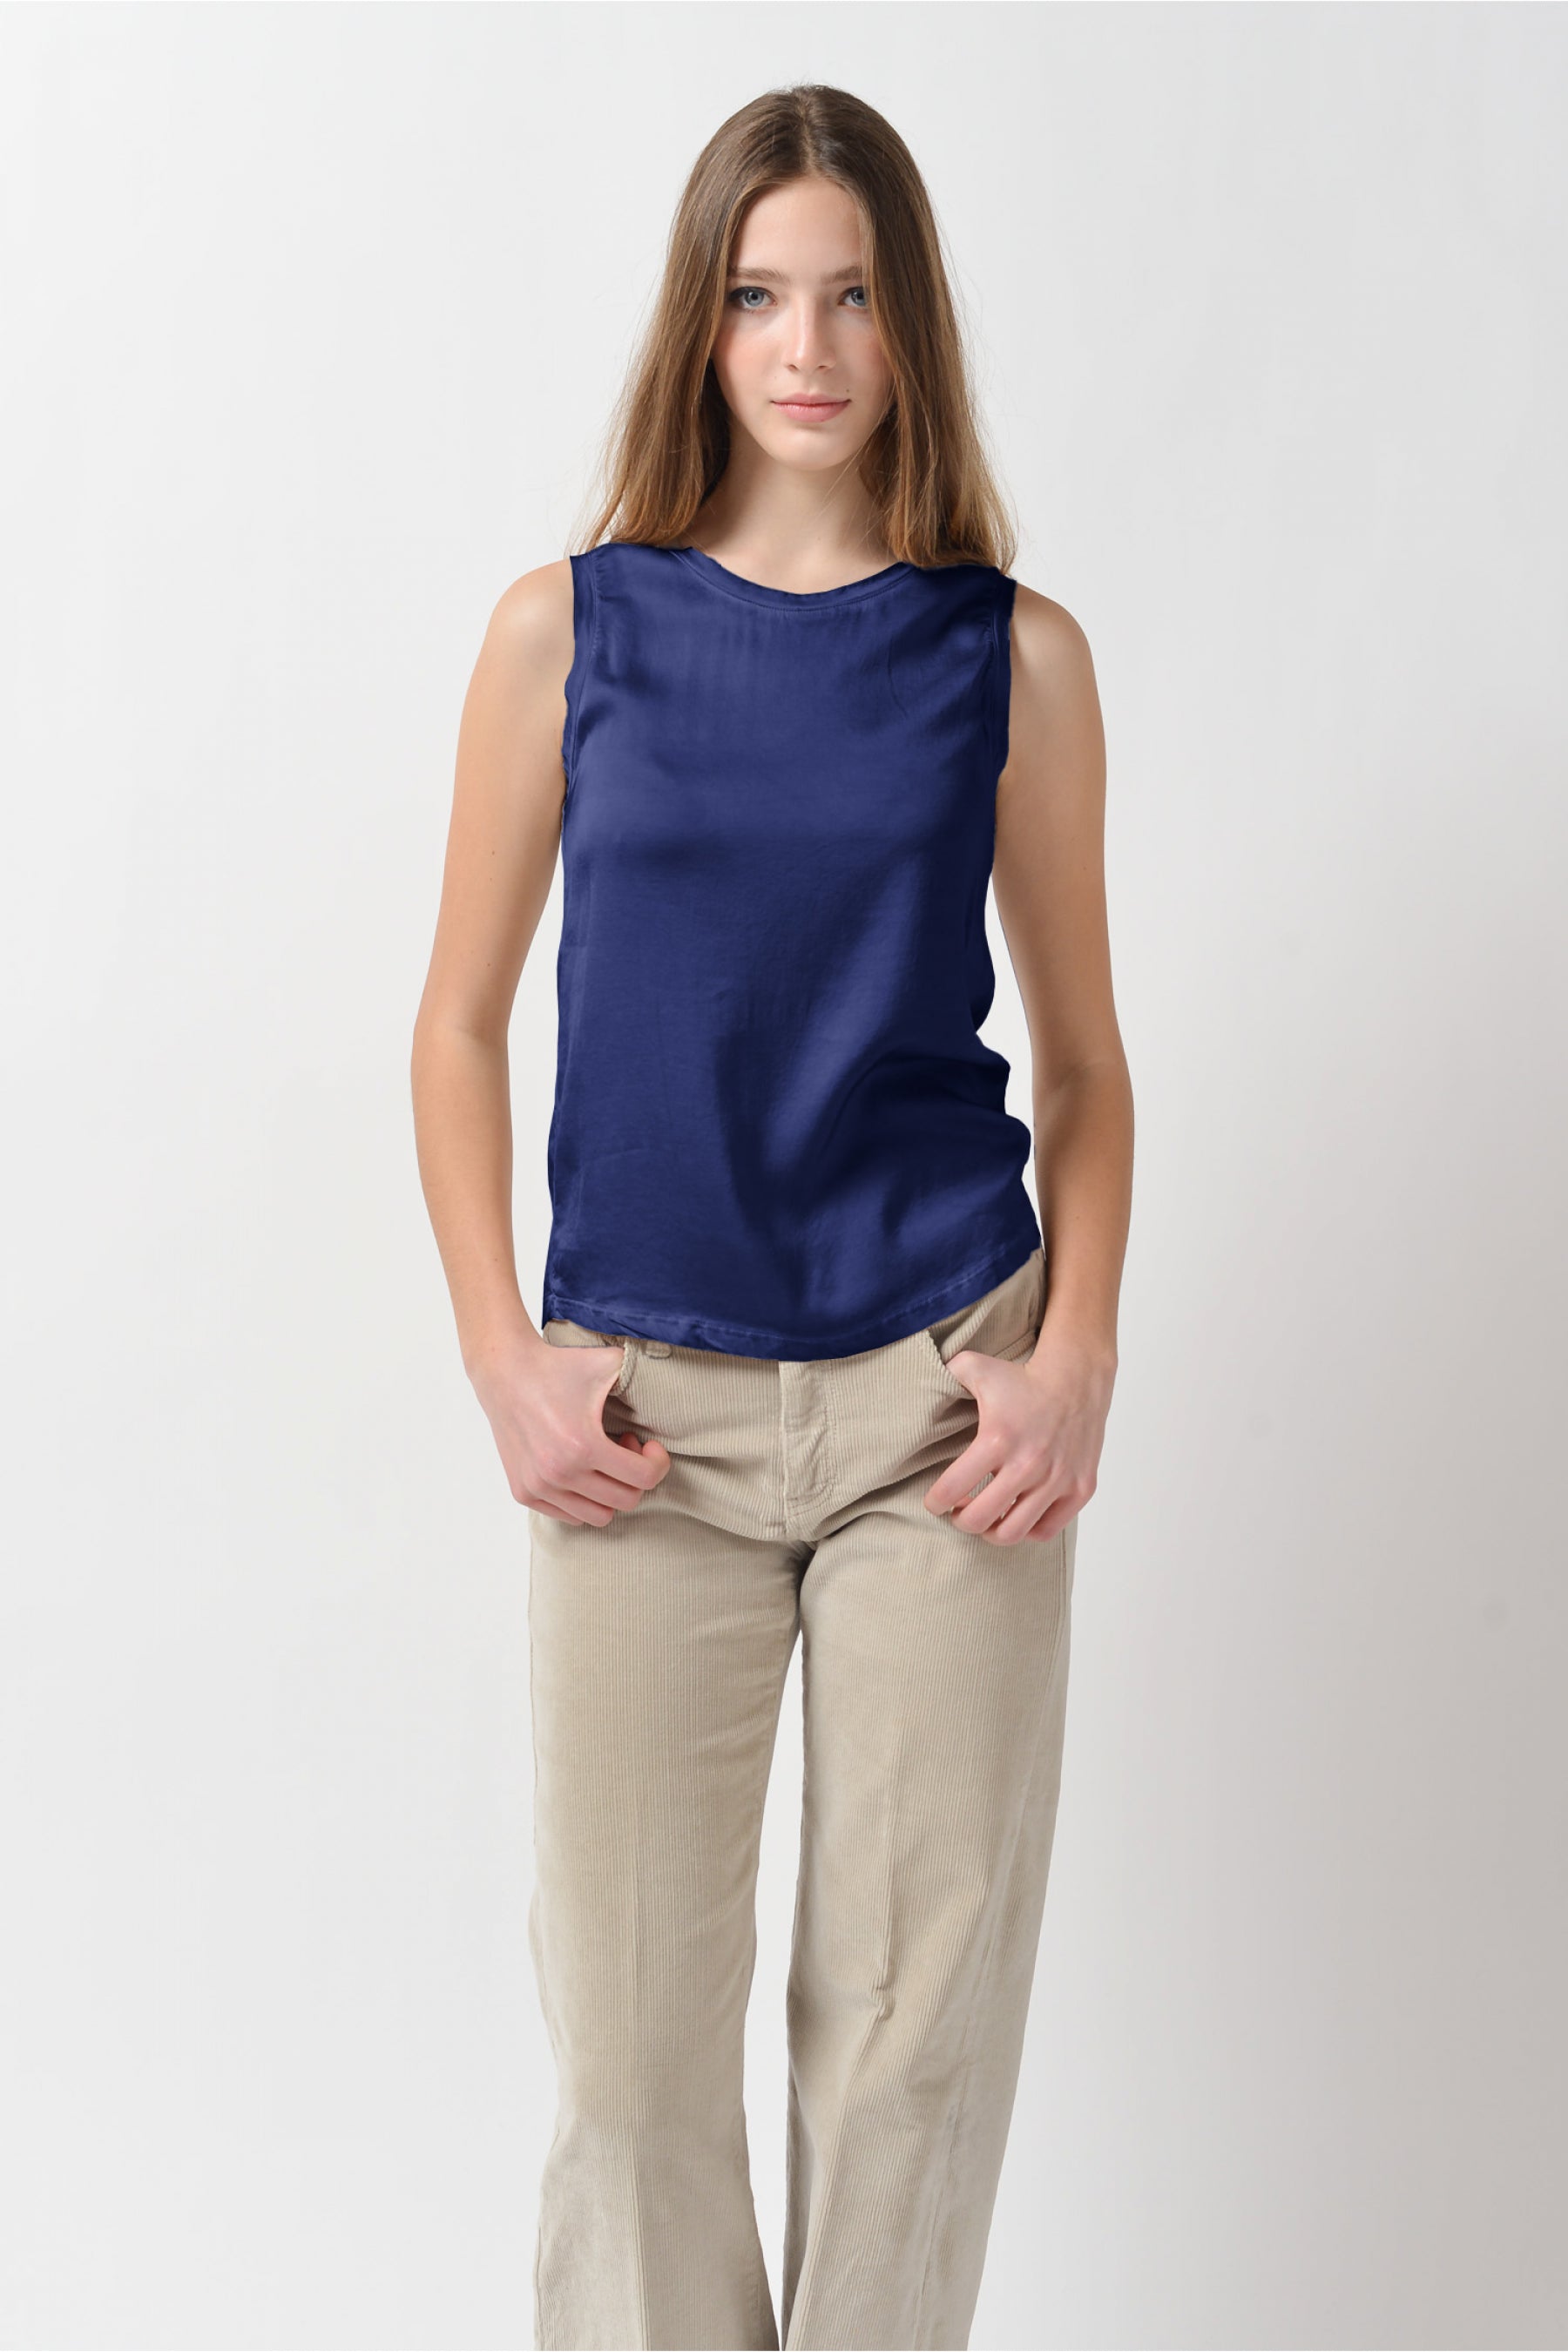 Soave Solid Tank Top - Navy